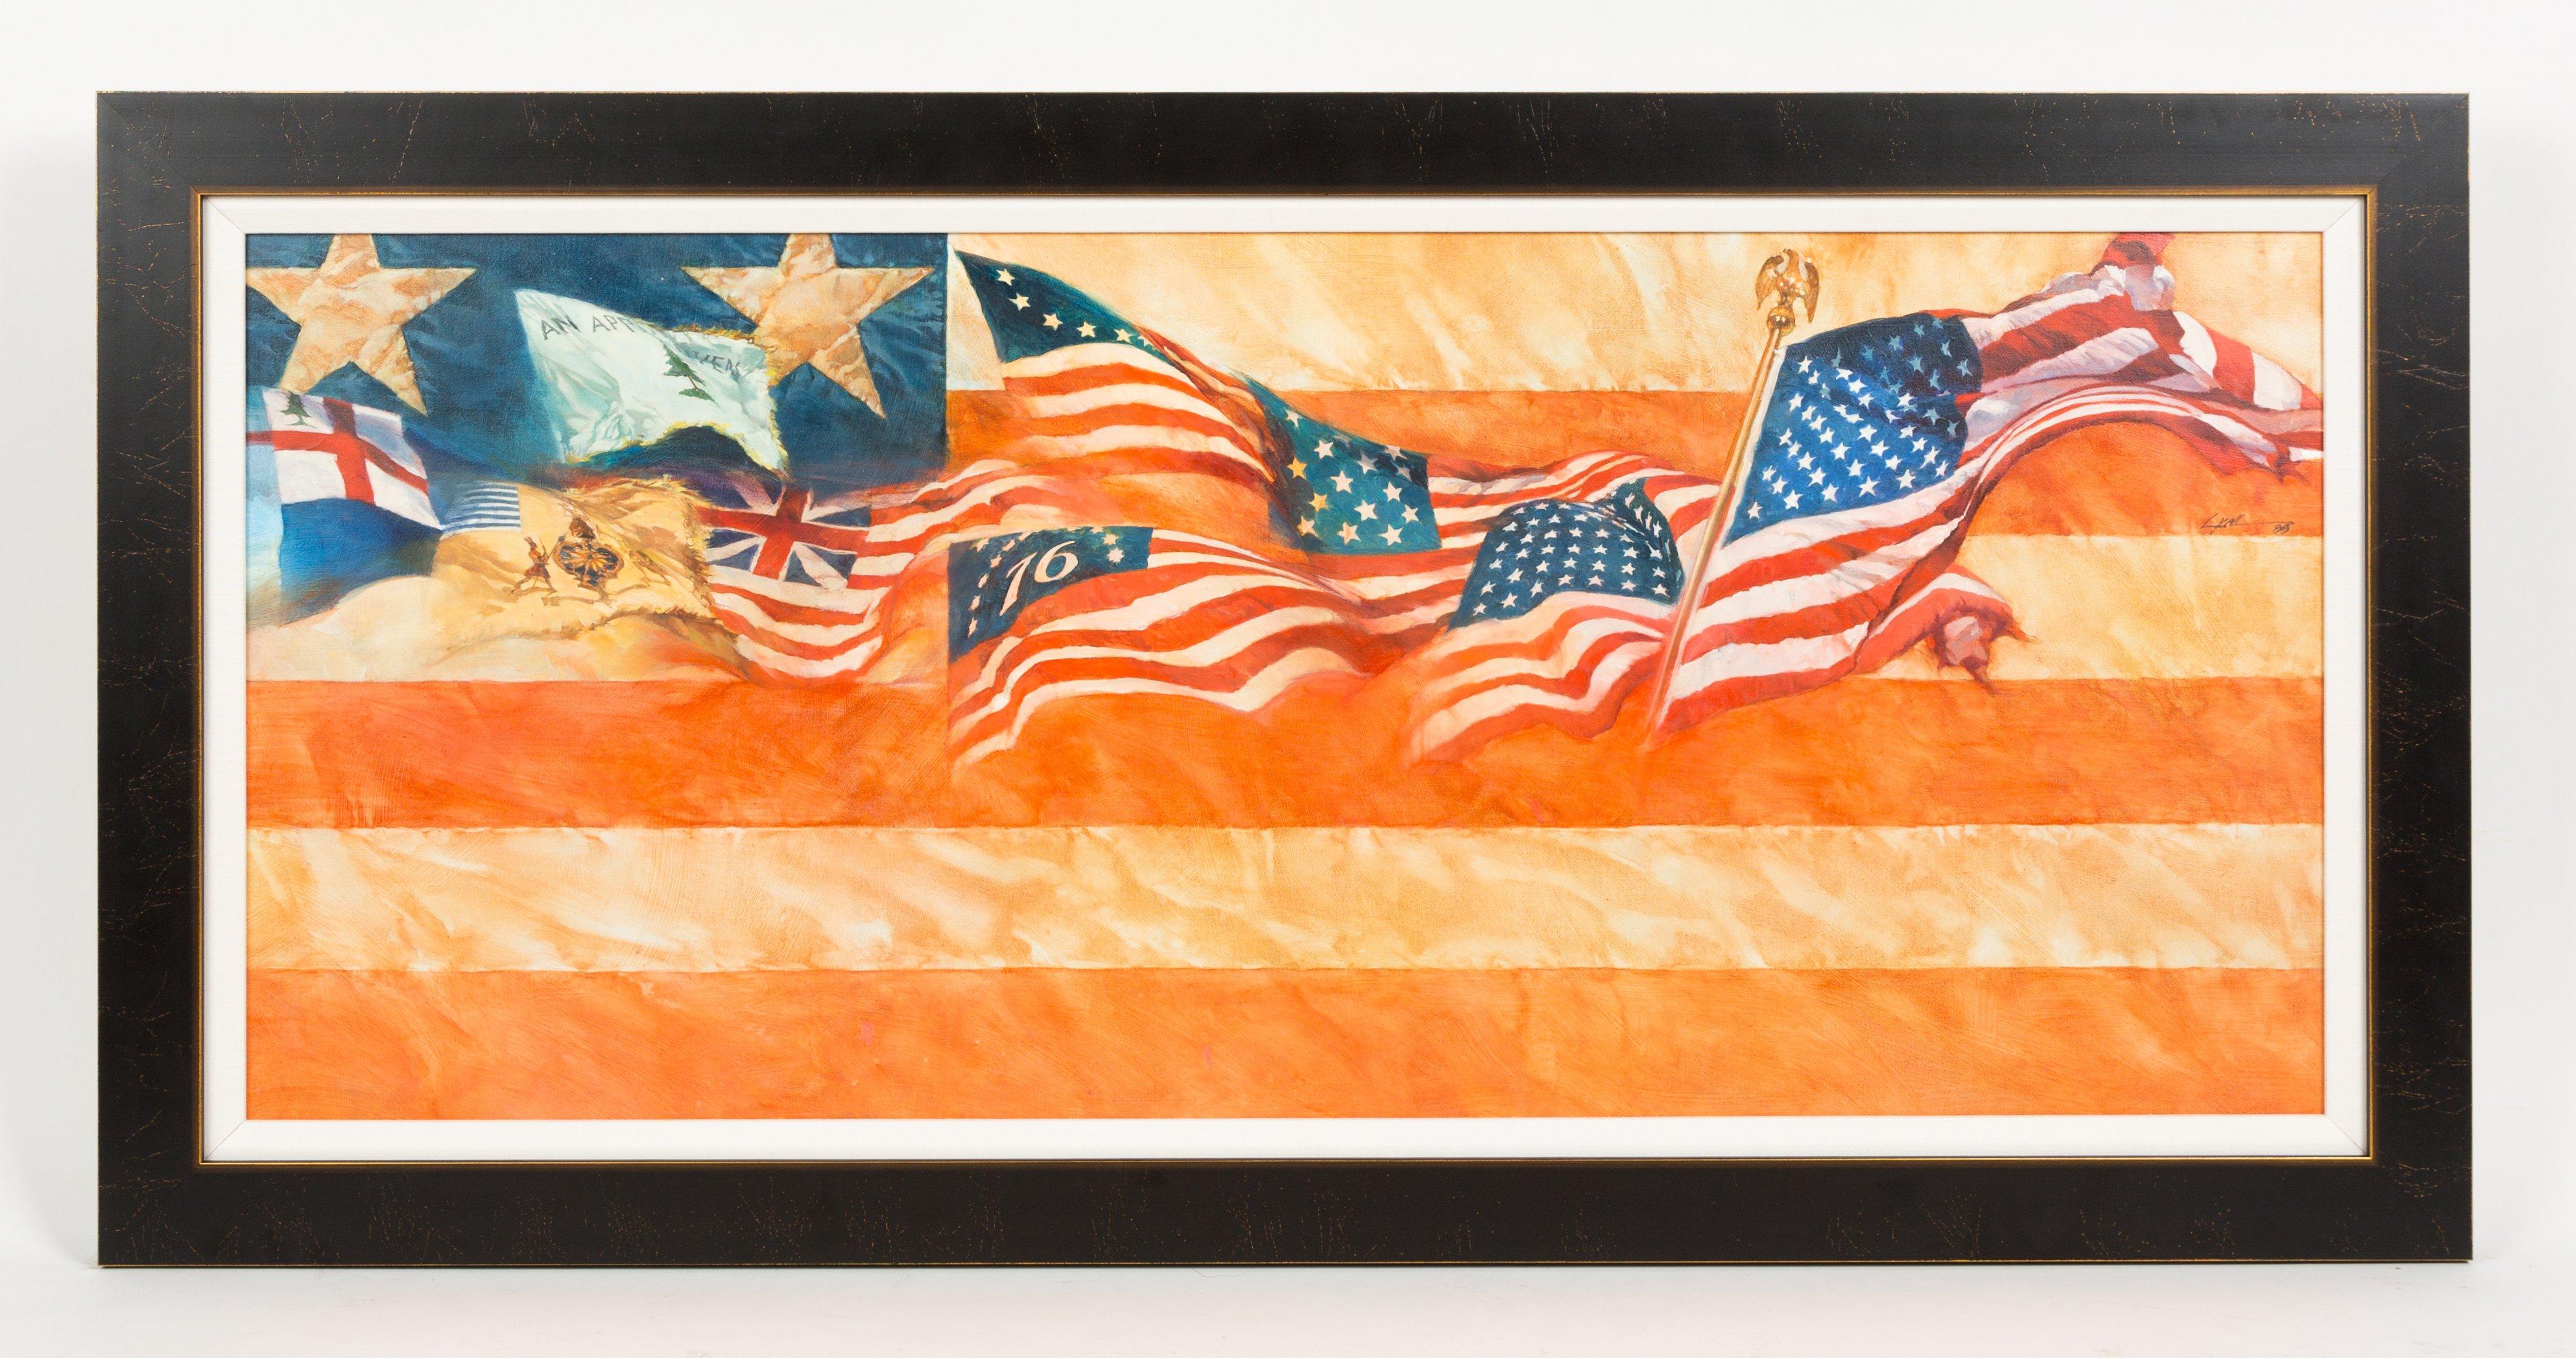 This original oil painting on canvas, entitled American Flags, was painted by Dennis Lyall in 1988. The work originally appeared in the Fleetwood Triptych panel for the U.S. Flag stamps series. Lyall signed the work underneath the rightmost flag.